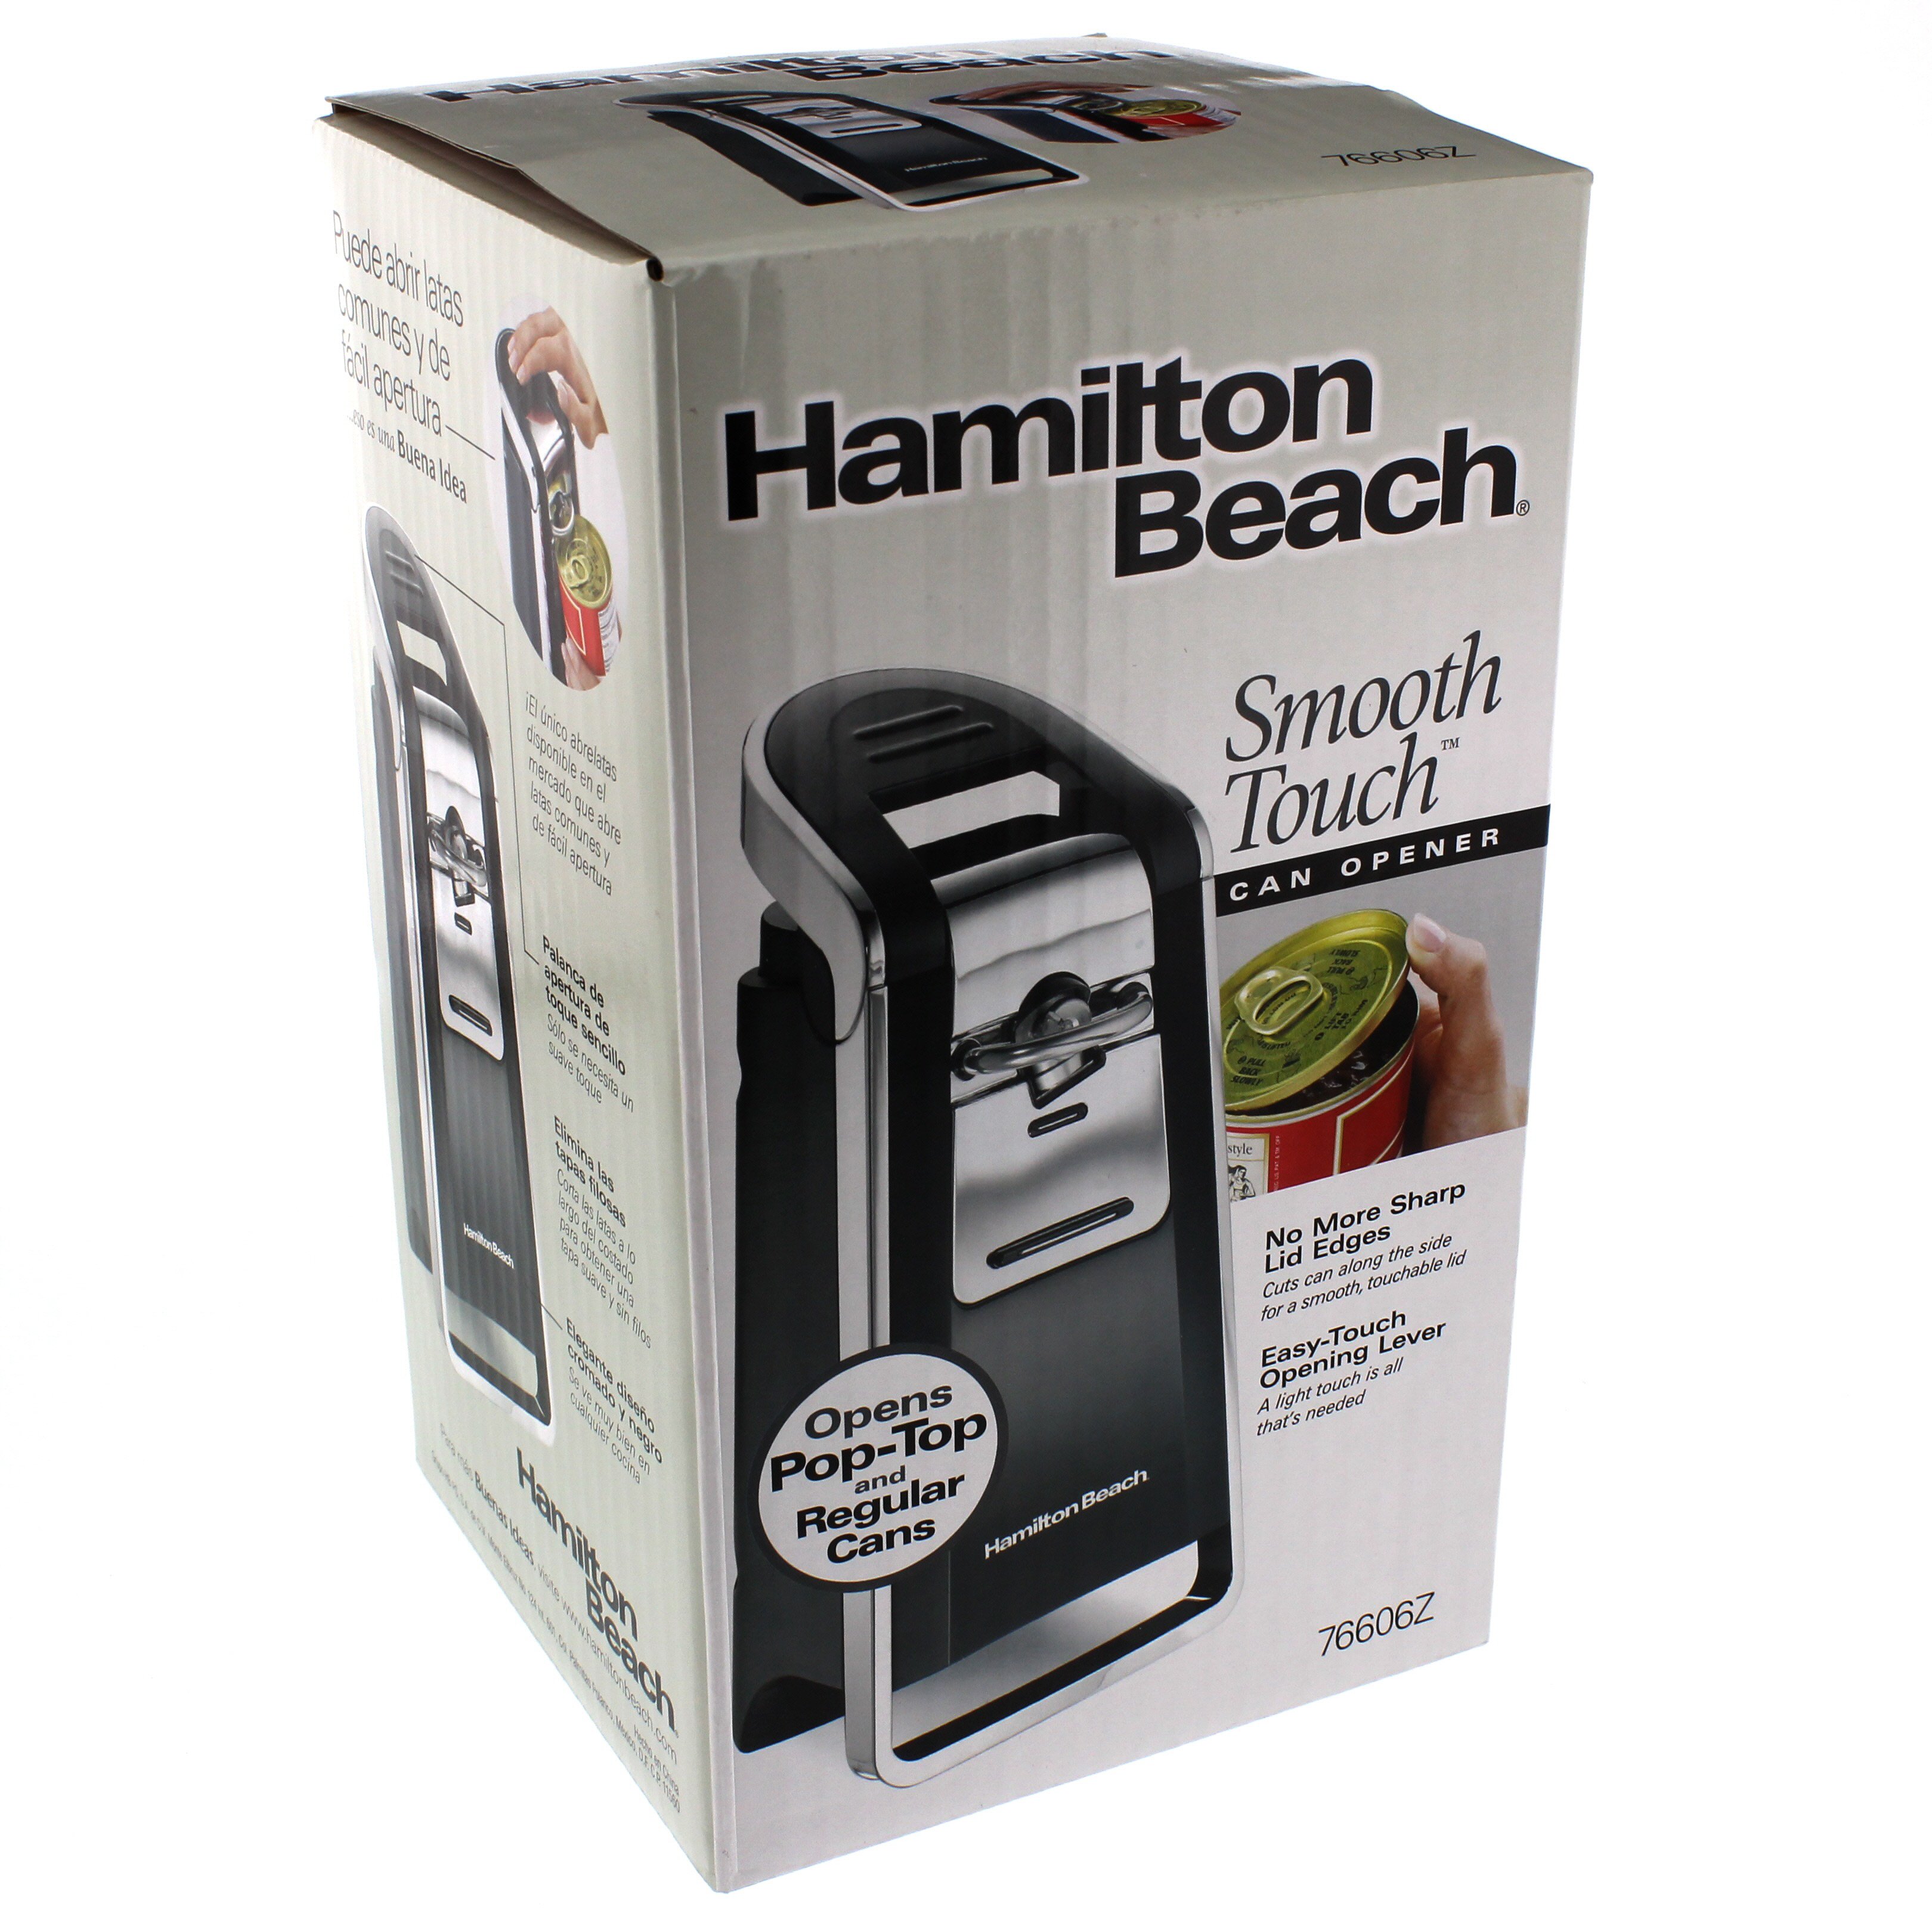 Hamilton Beach Smooth Touch Electric Can Opener with Scissors